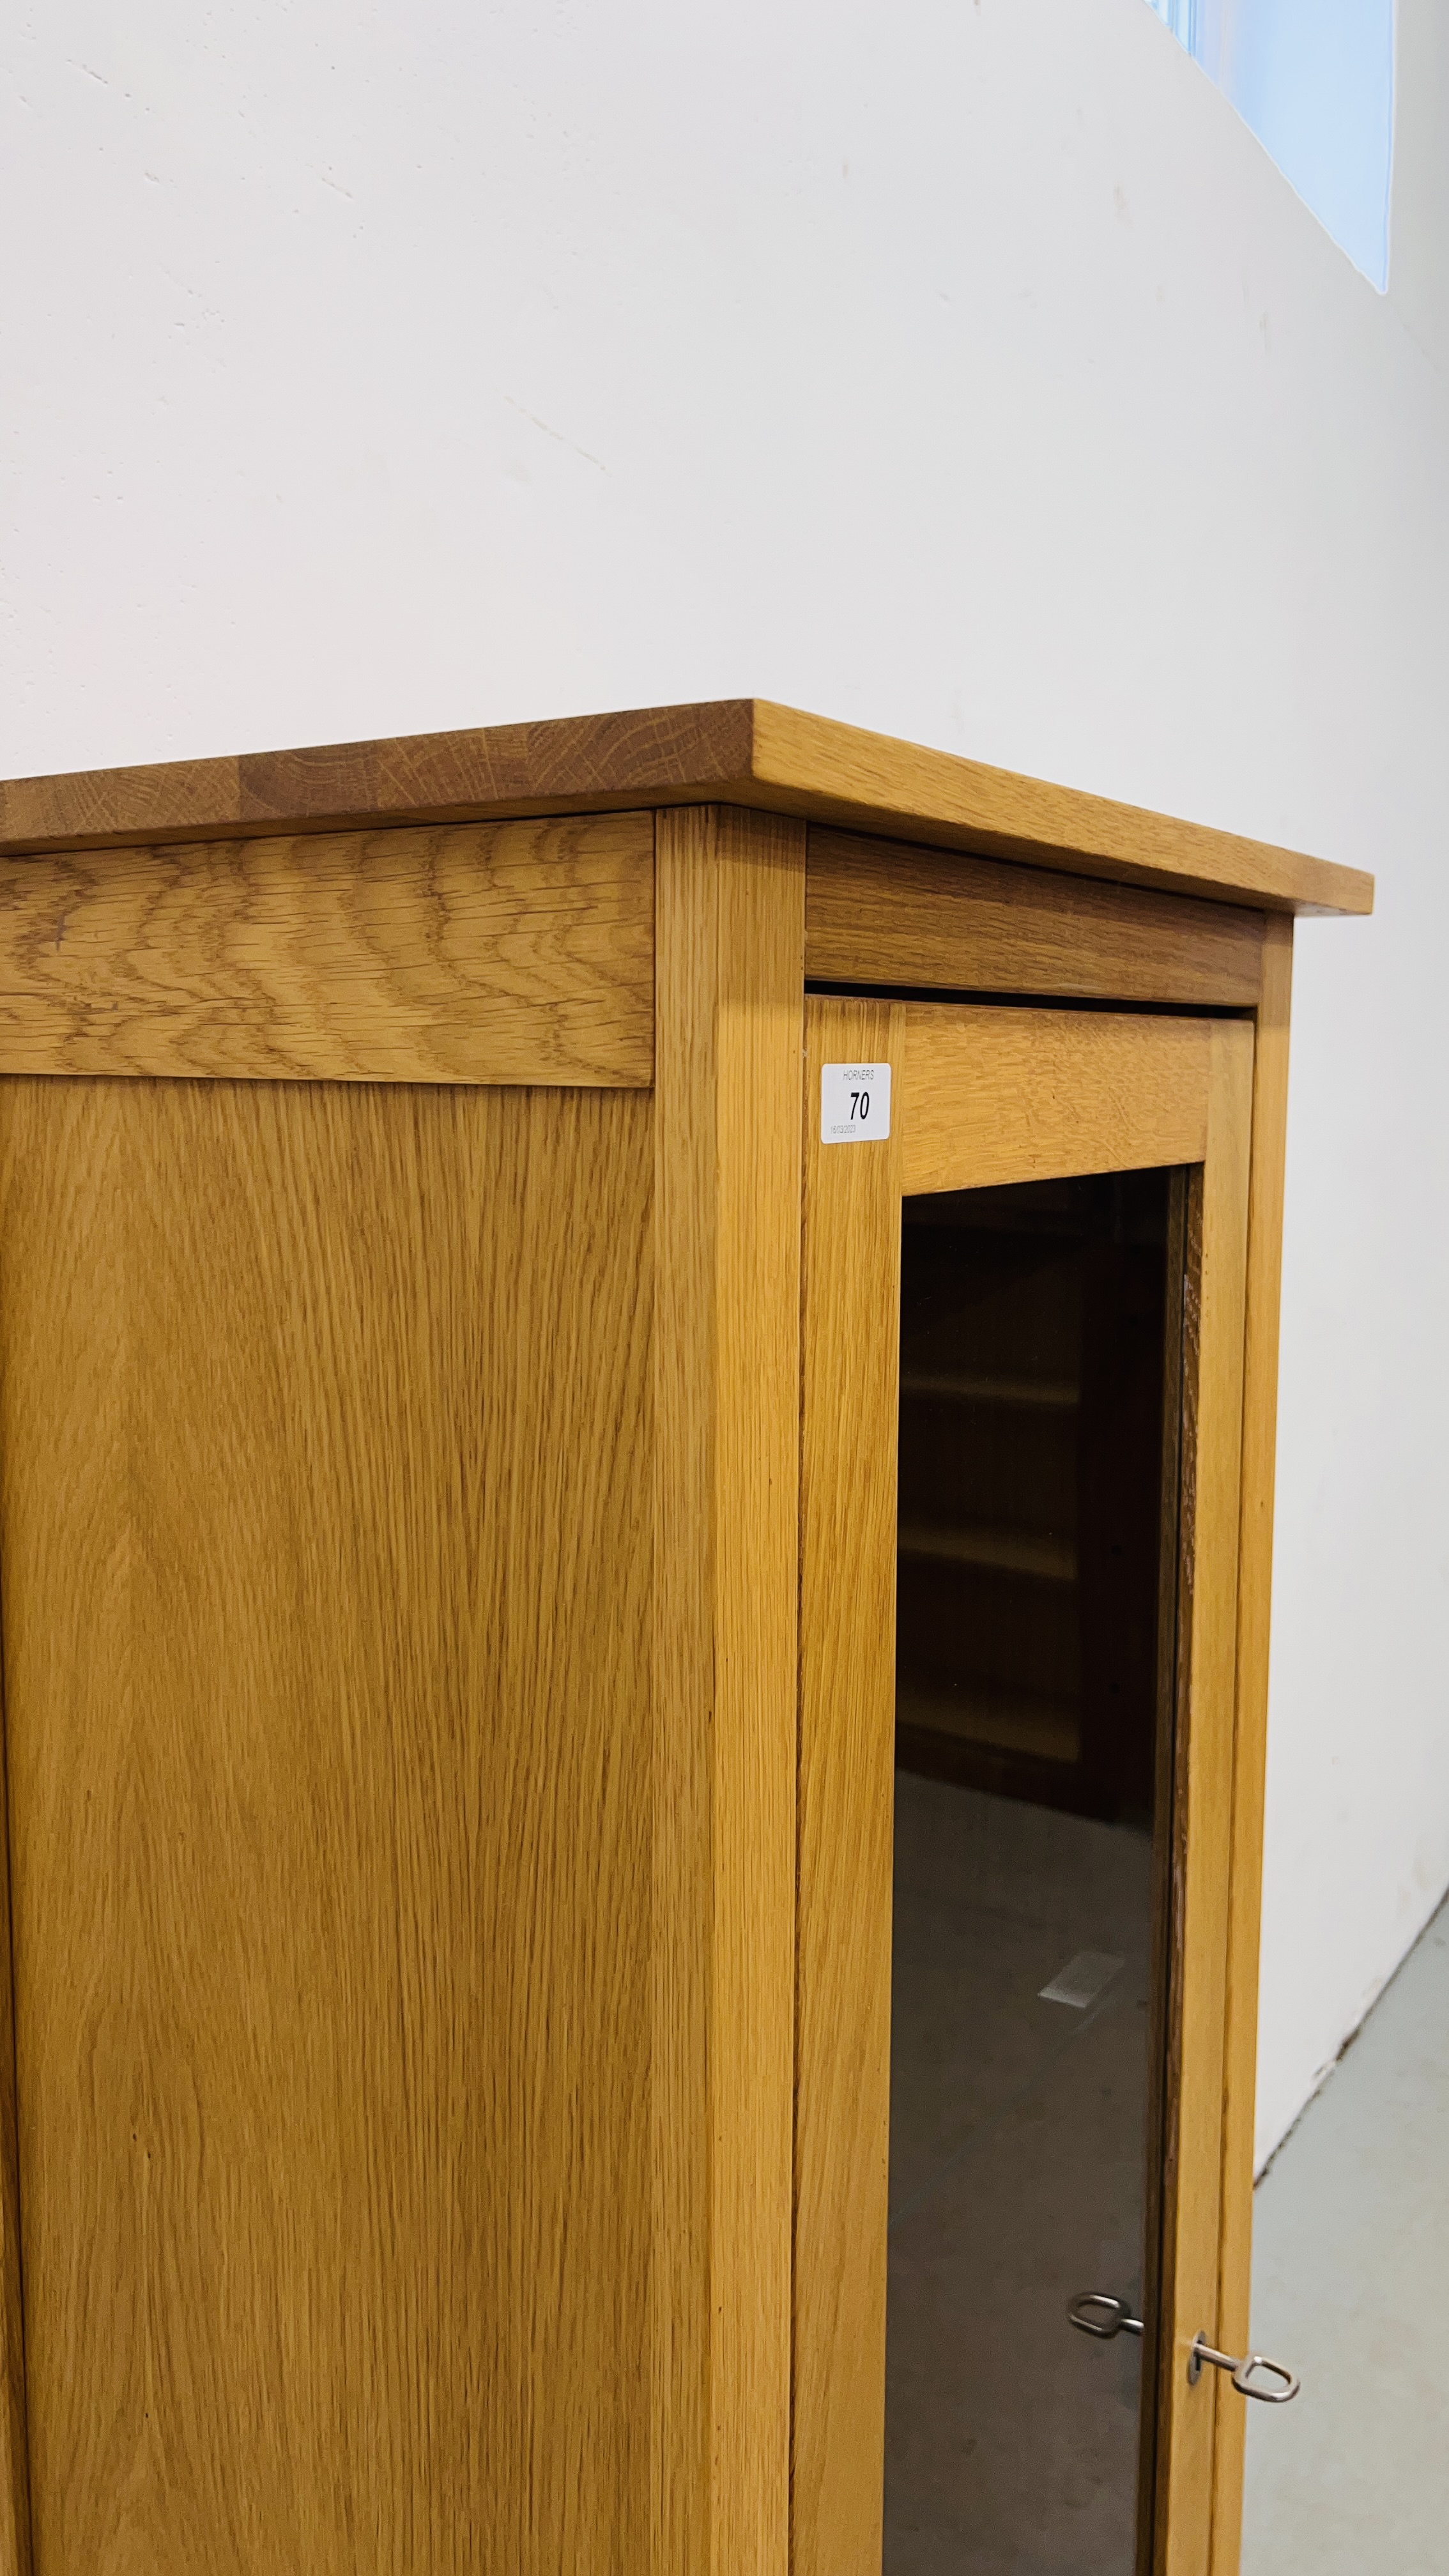 A SOLID LIGHT OAK MODERN TOWER DISPLAY CABINET WIDTH 51CM. HEIGHT 134CM. - Image 6 of 9